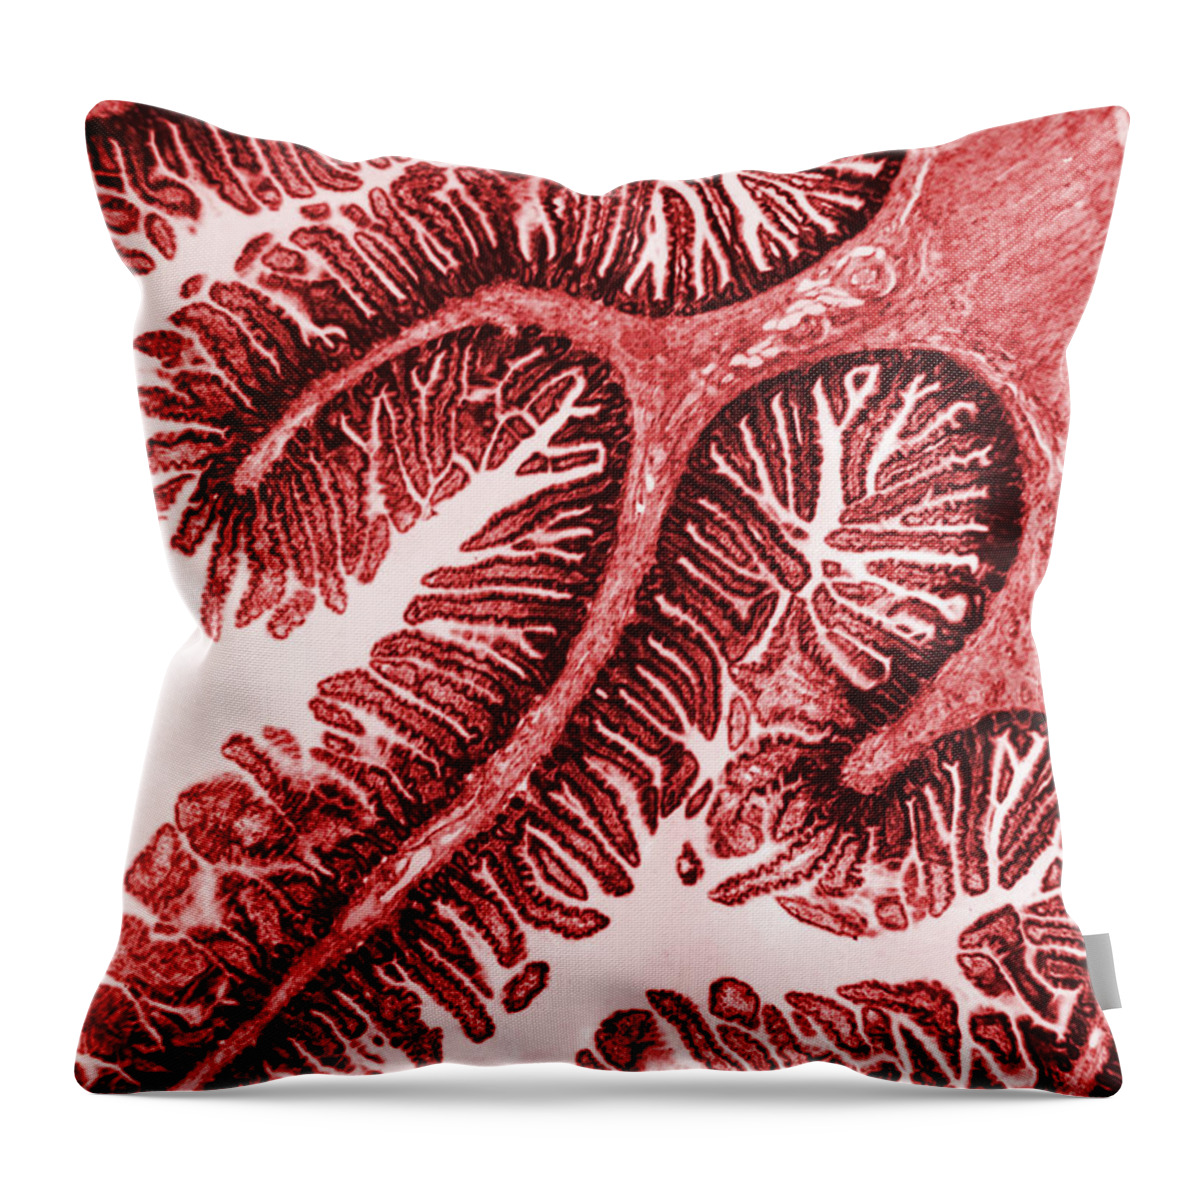 Cell Throw Pillow featuring the photograph Tem Of Intestinal Villi by Science Source